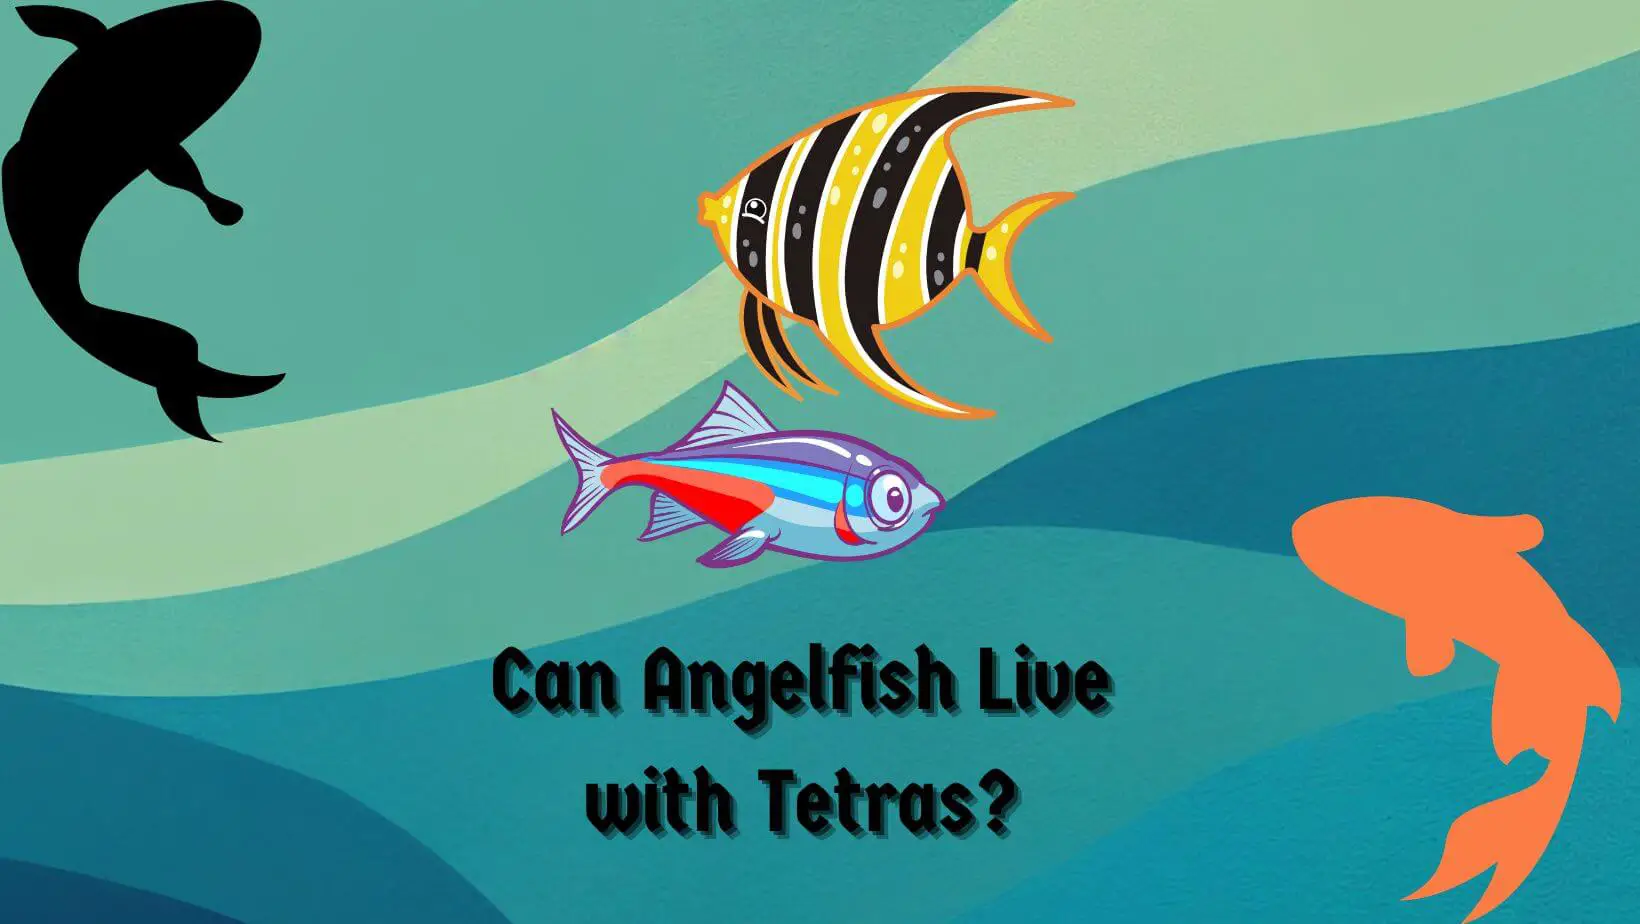 Can Angelfish Live with Tetras